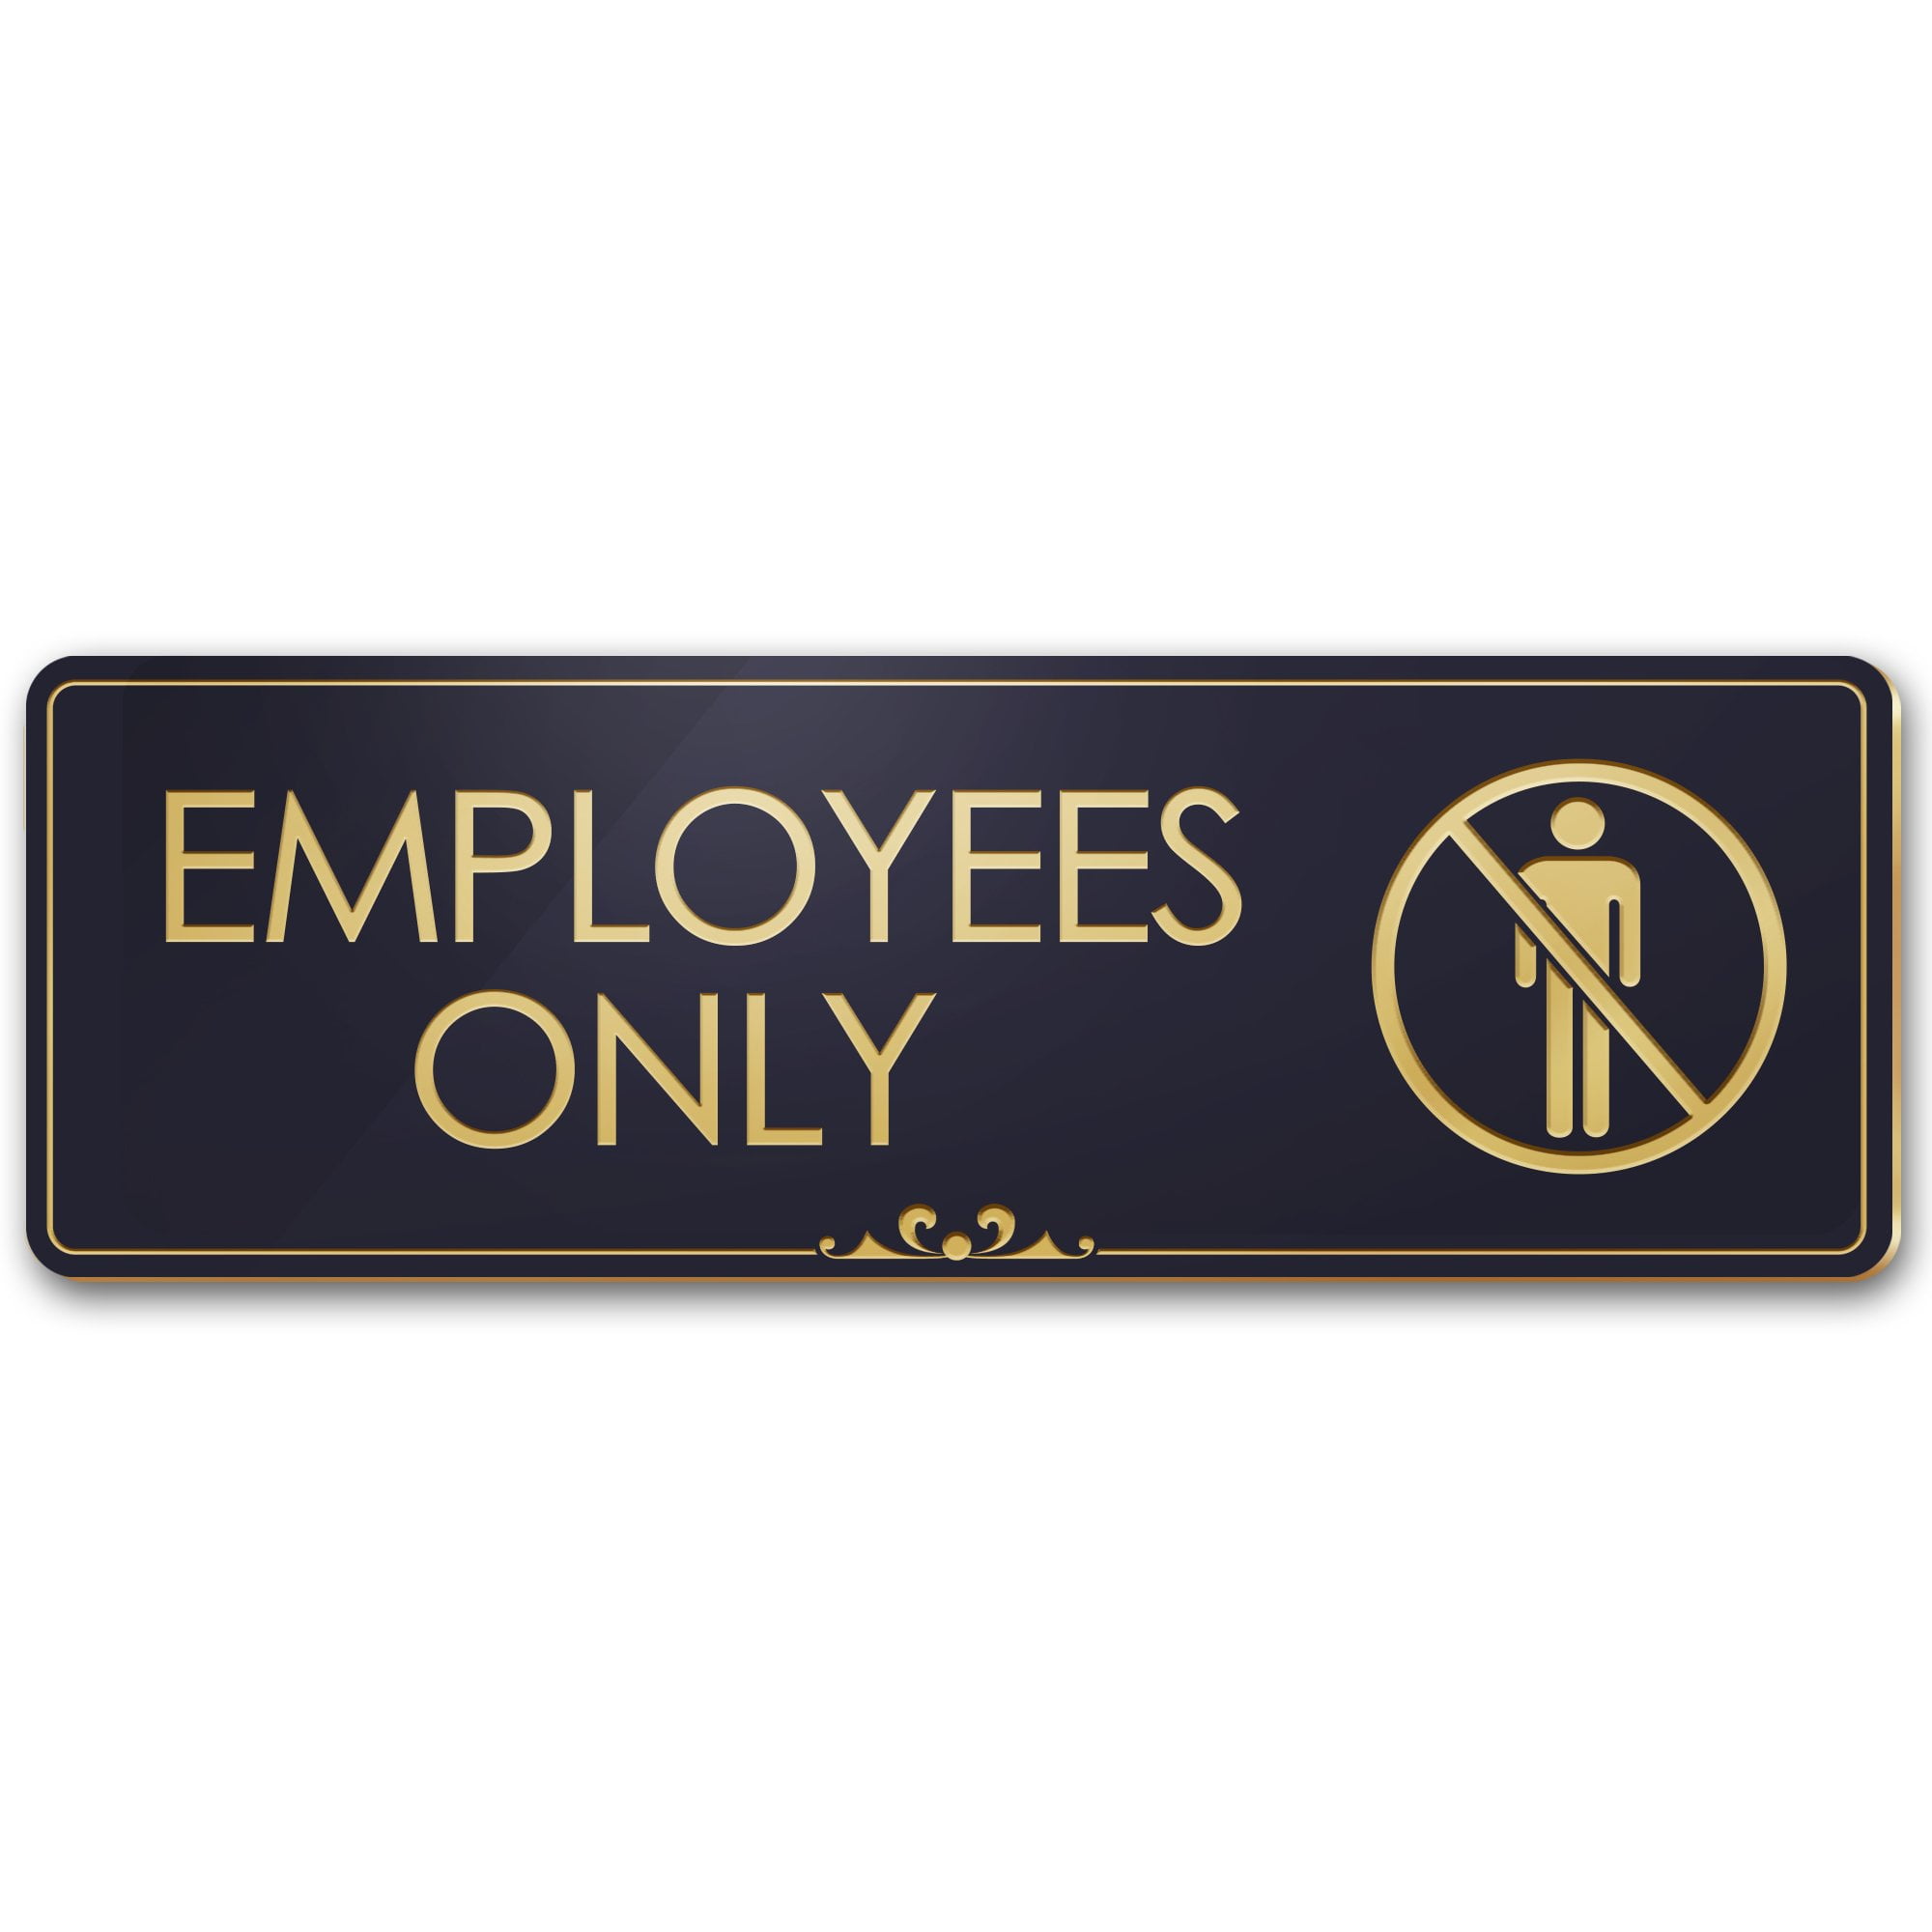 Small 3 x 6 Black/Gold Employees ONLY Victorian Door/Wall Sign 